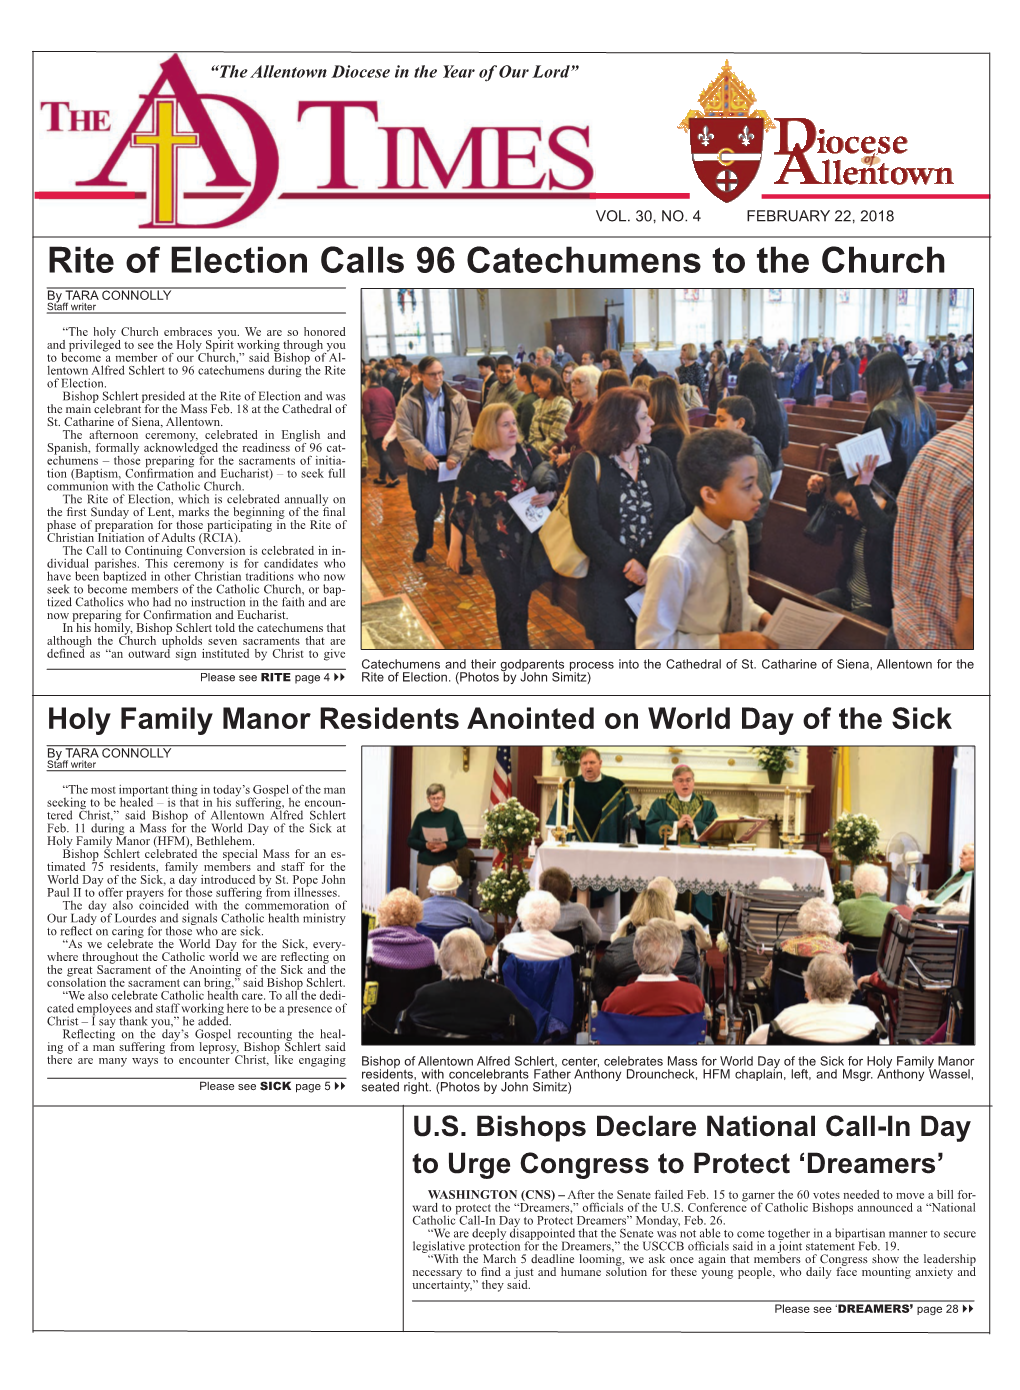 Rite of Election Calls 96 Catechumens to the Church by TARA CONNOLLY Staff Writer